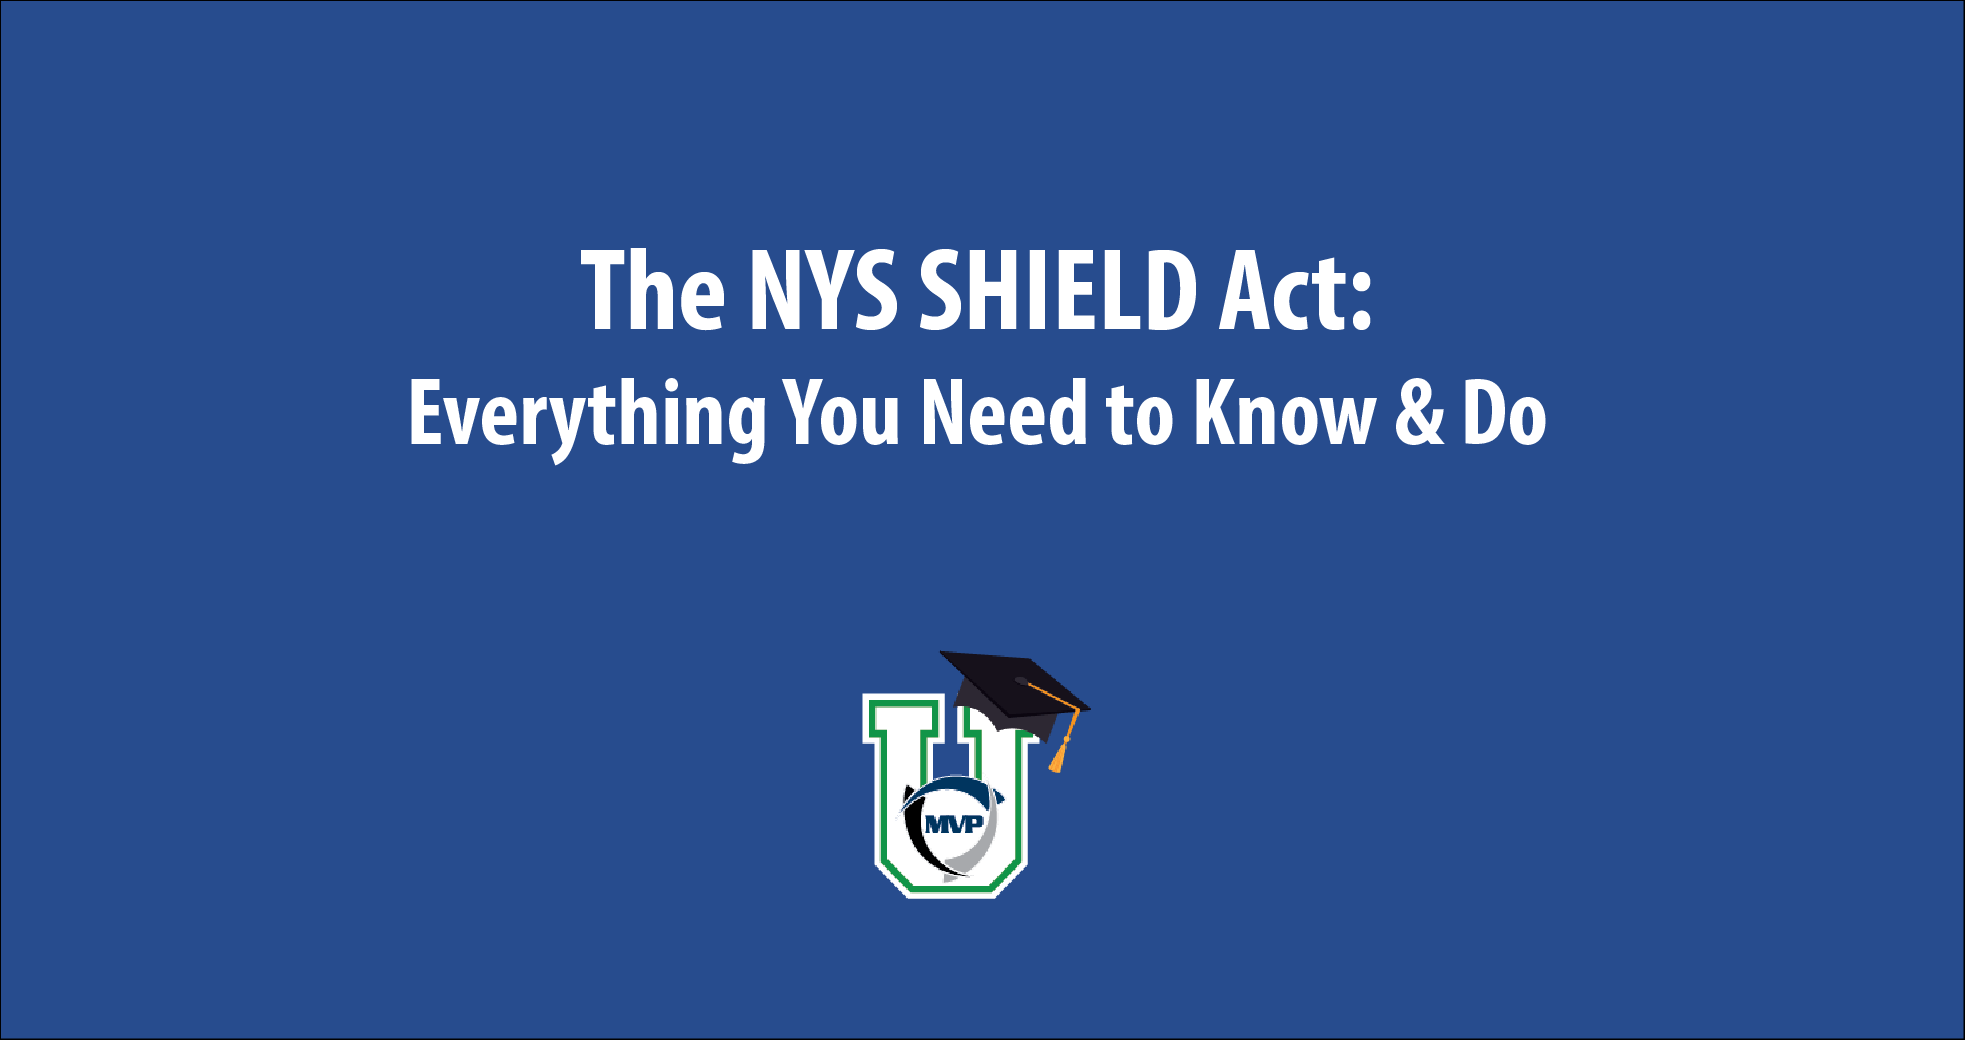 NYS SHIELD Act: Everything you need to know & do